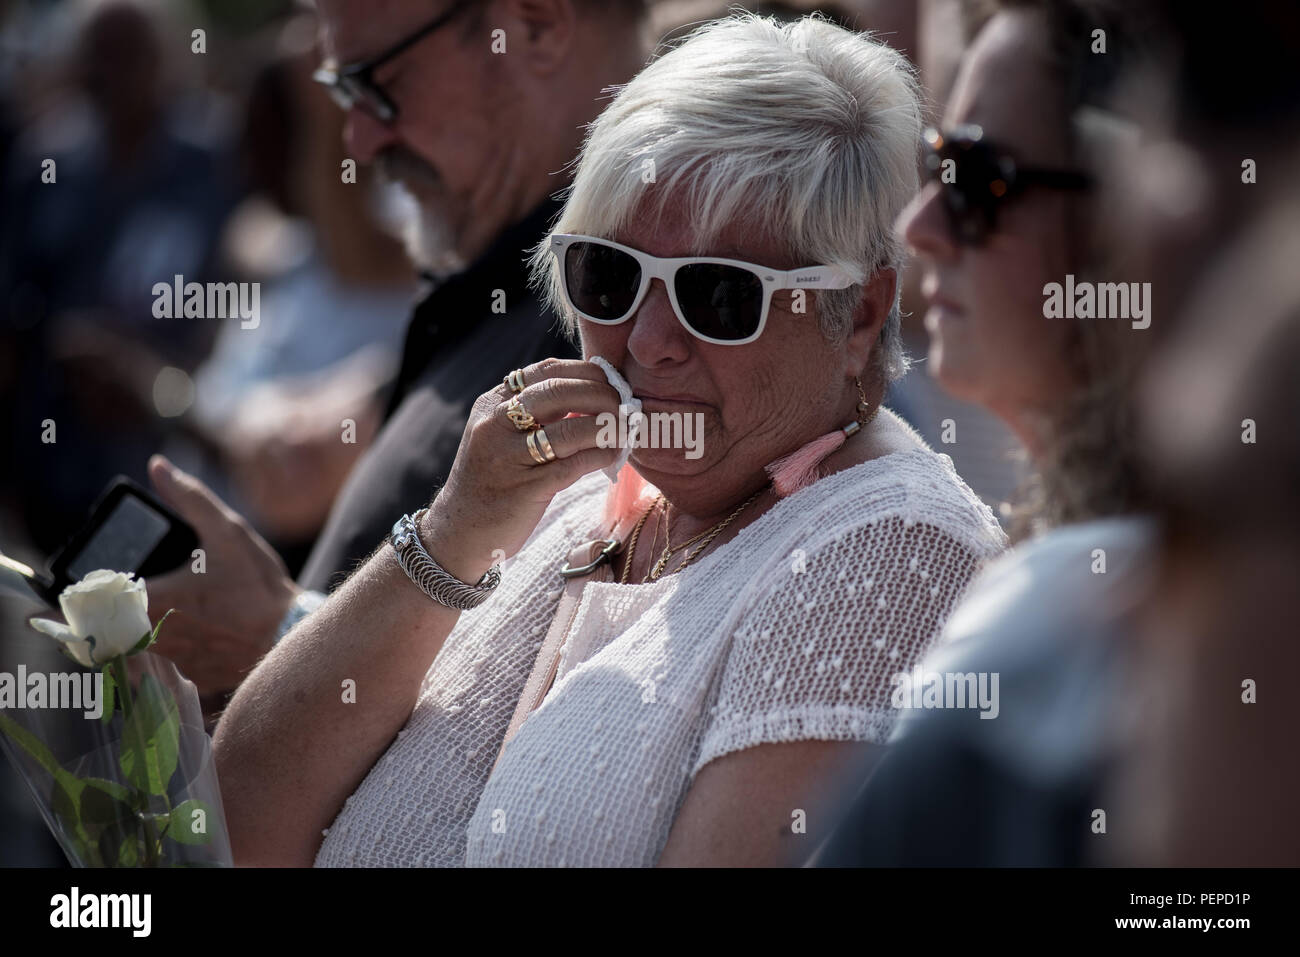 Barcelona, Spain. 17th Aug 2018. August 17, 2018 - Barcelona, Catalonia, Spain -  A woman reacts in Barcelona during the homenage  for the victims of last year's terror attacks  that  killed  16 people and injured more than 120  when two vehicles crashed into the crowds. Credit:  Jordi Boixareu/Alamy Live News Stock Photo